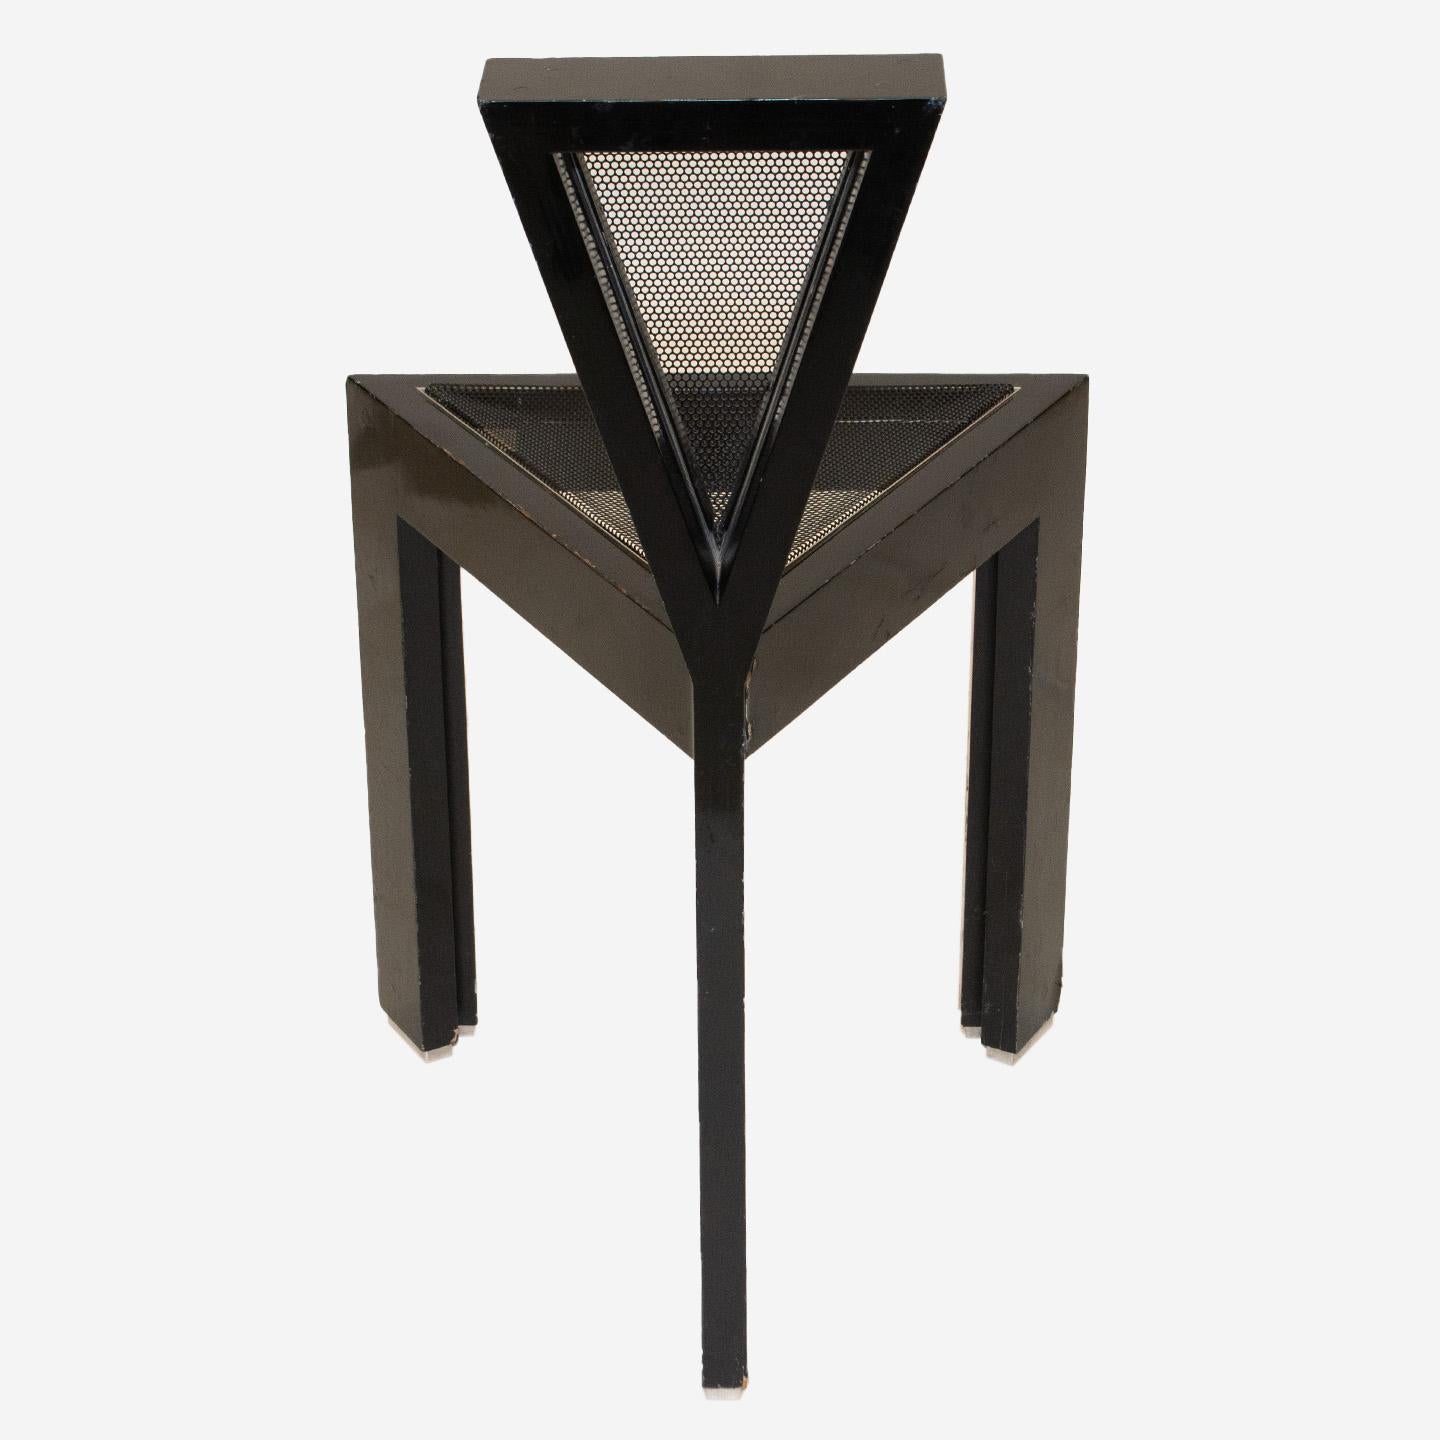 American Memphis Style Modernist Triangular Chair by Carl Tese For Sale